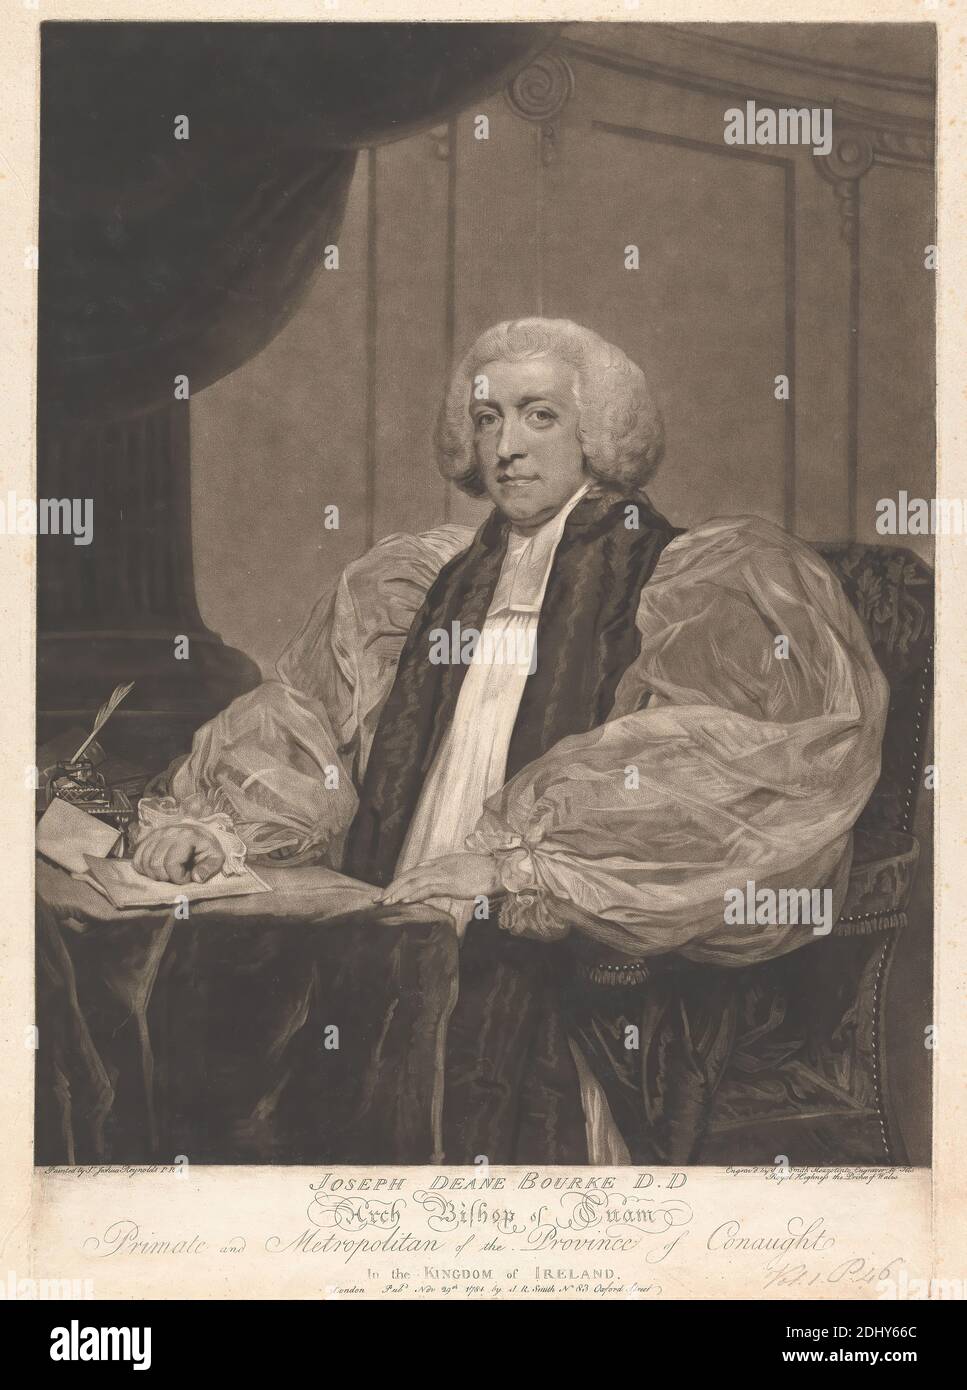 Joseph Deane Bourke, 3rd Earl of Mayo, John Raphael Smith, 1752–1812, British, after Sir Joshua Reynolds RA, 1723–1792, British, 1784, Mezzotint on medium, moderately textured, beige, laid paper, Sheet: 20 9/16 × 15 11/16 inches (52.2 × 39.8 cm), Plate: 19 7/8 × 14 1/16 inches (50.5 × 35.7 cm), and Image: 17 13/16 × 13 15/16 inches (45.2 × 35.4 cm), chair, column (architectural element), earl, ink, man, papers, portrait, quill, religious and mythological subject, tippet, wig Stock Photo